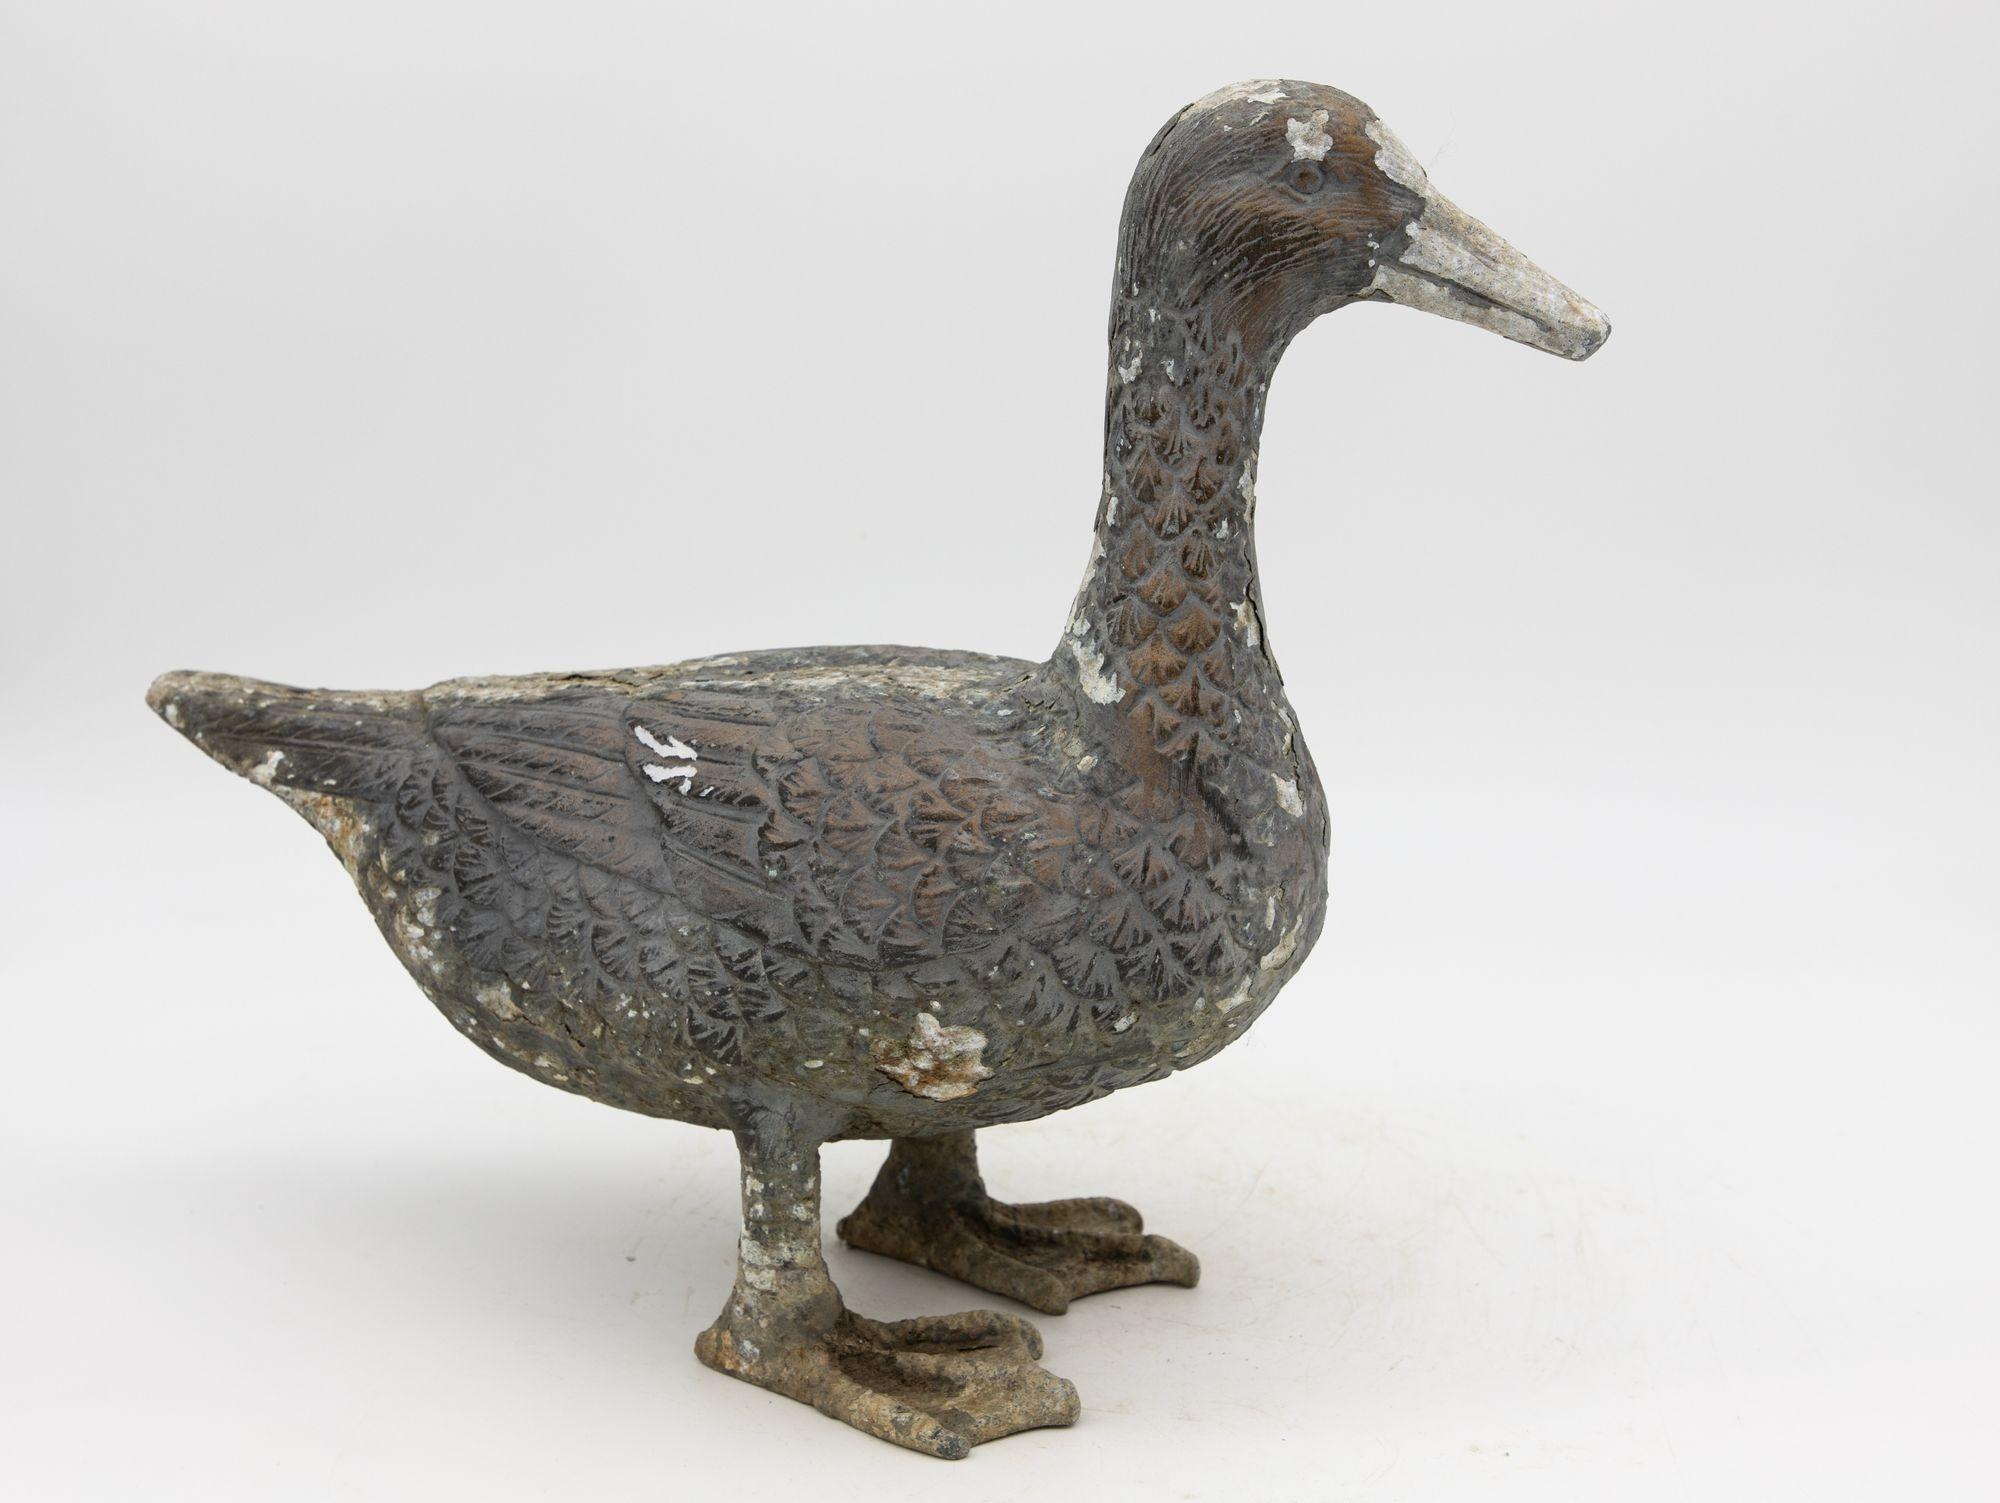 A life-sized cast metal model of a duck. French early 20th century. Wear consistent with age and use.